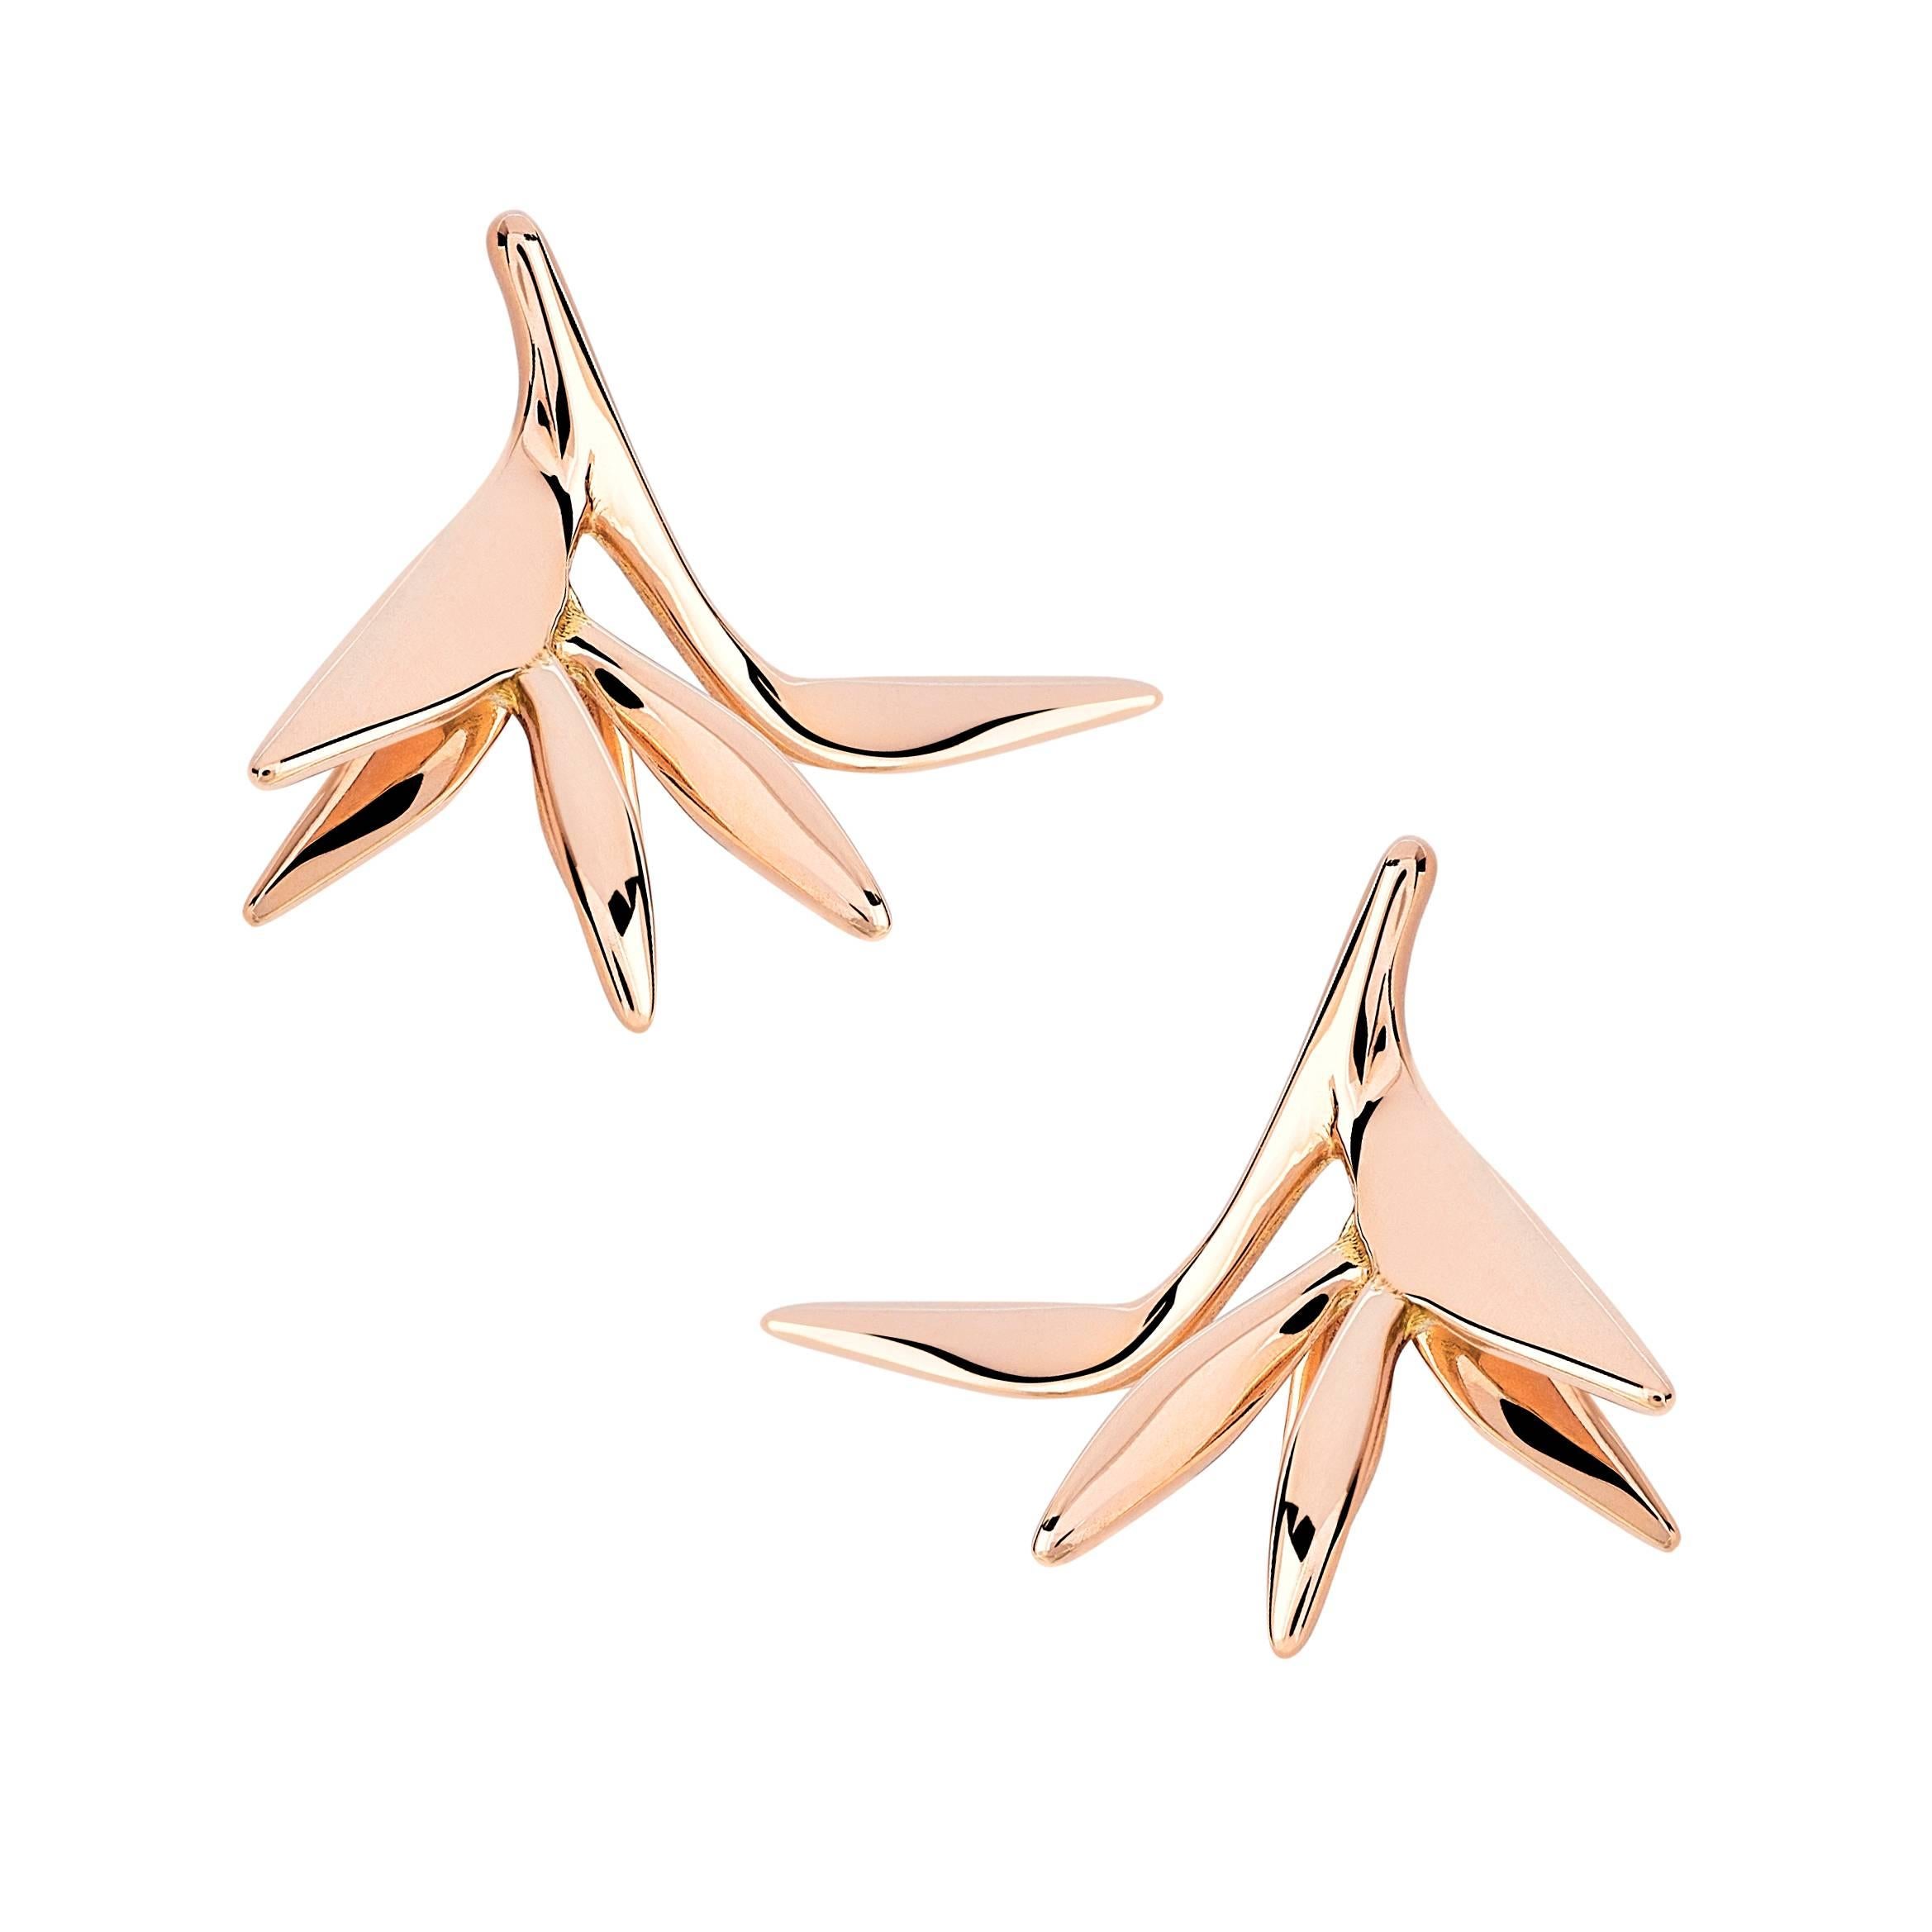 The Petite Bird of Paradise Earrings inherits its name from the tropical crane flower and are set in 18k Fairtrade rose gold.